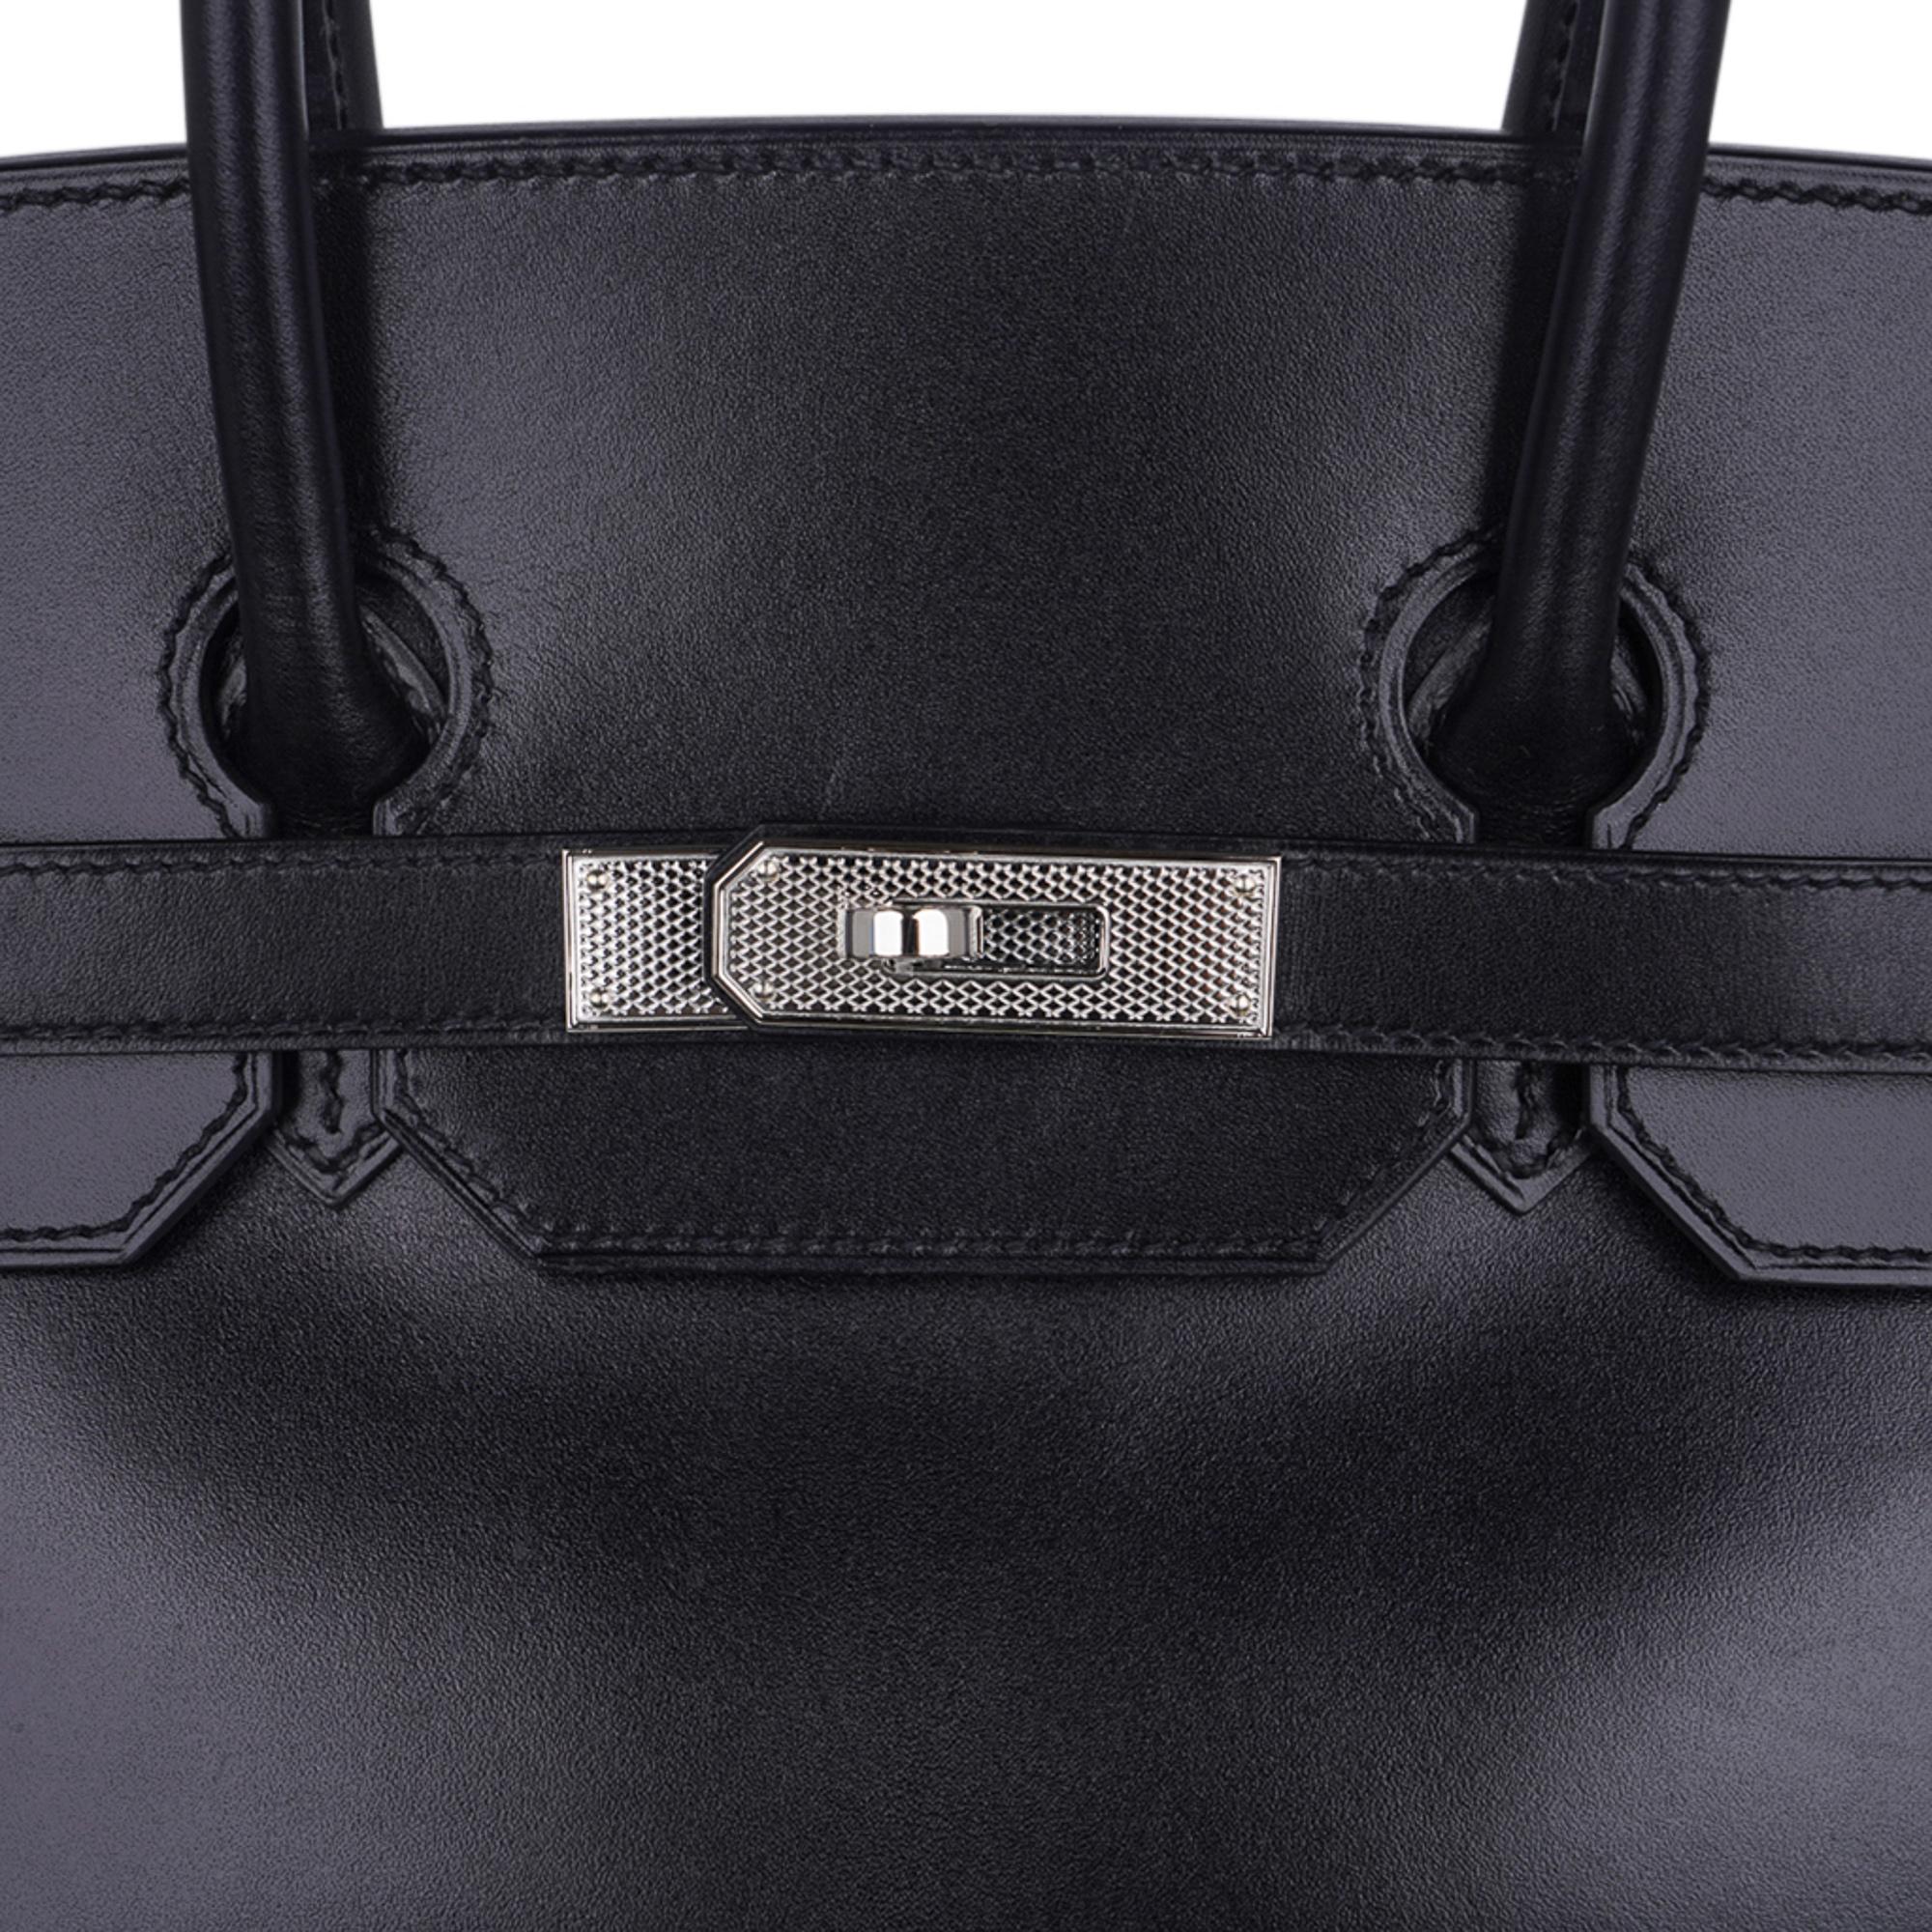 Mightychic offers a guaranteed Hermes Birkin 35 bag featured in Black rare Box leather.
Beautiful with Palladium limited edition Guilloche Hardware.
An extraordinary combination.
Comes with lock, keys, clochette, sleeper, raincoat and signature